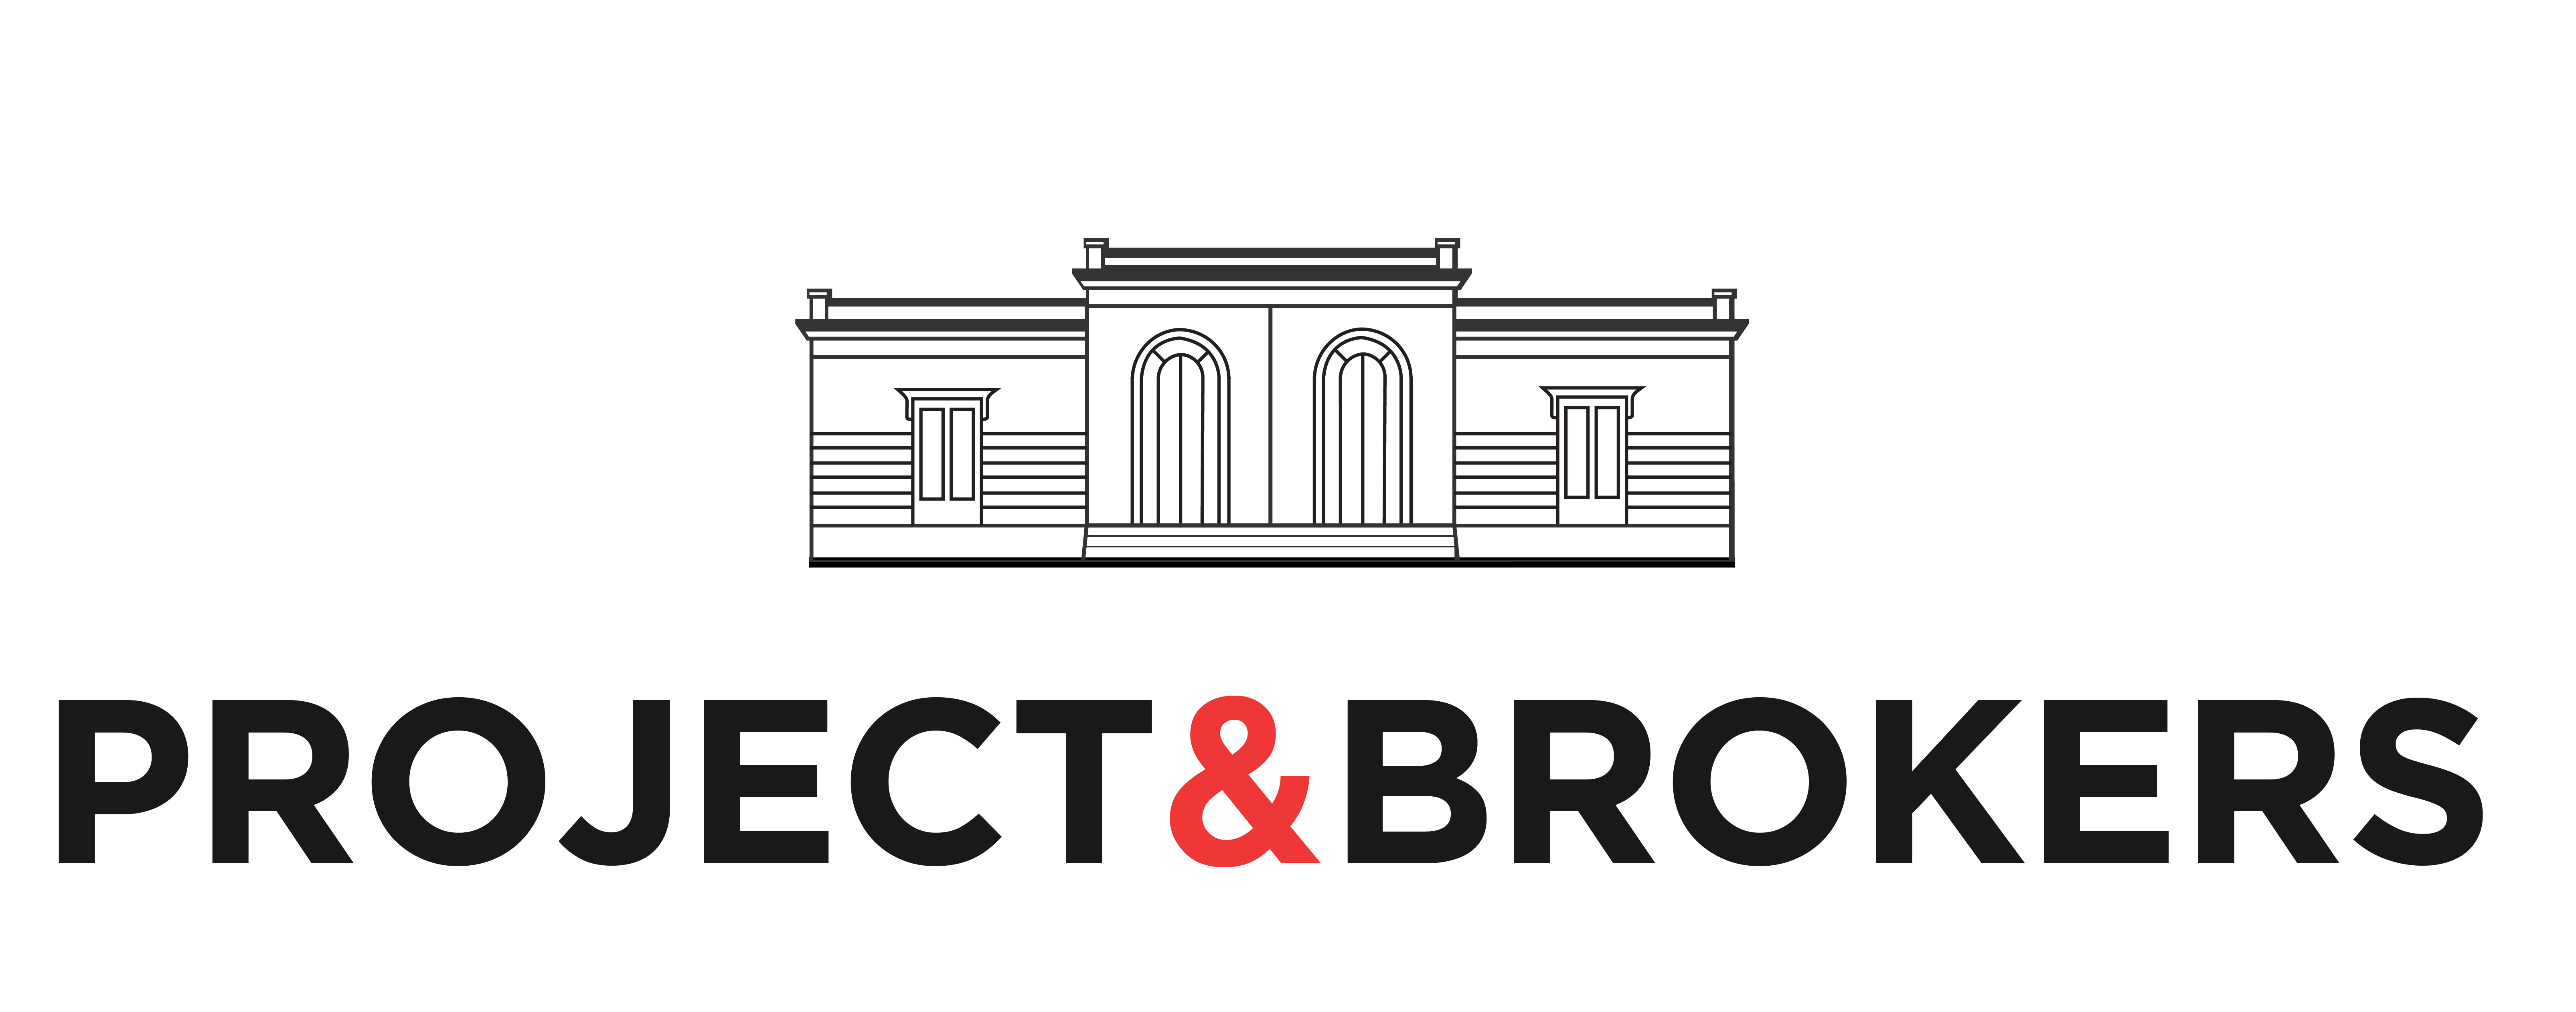 PROJECT & BROKERS